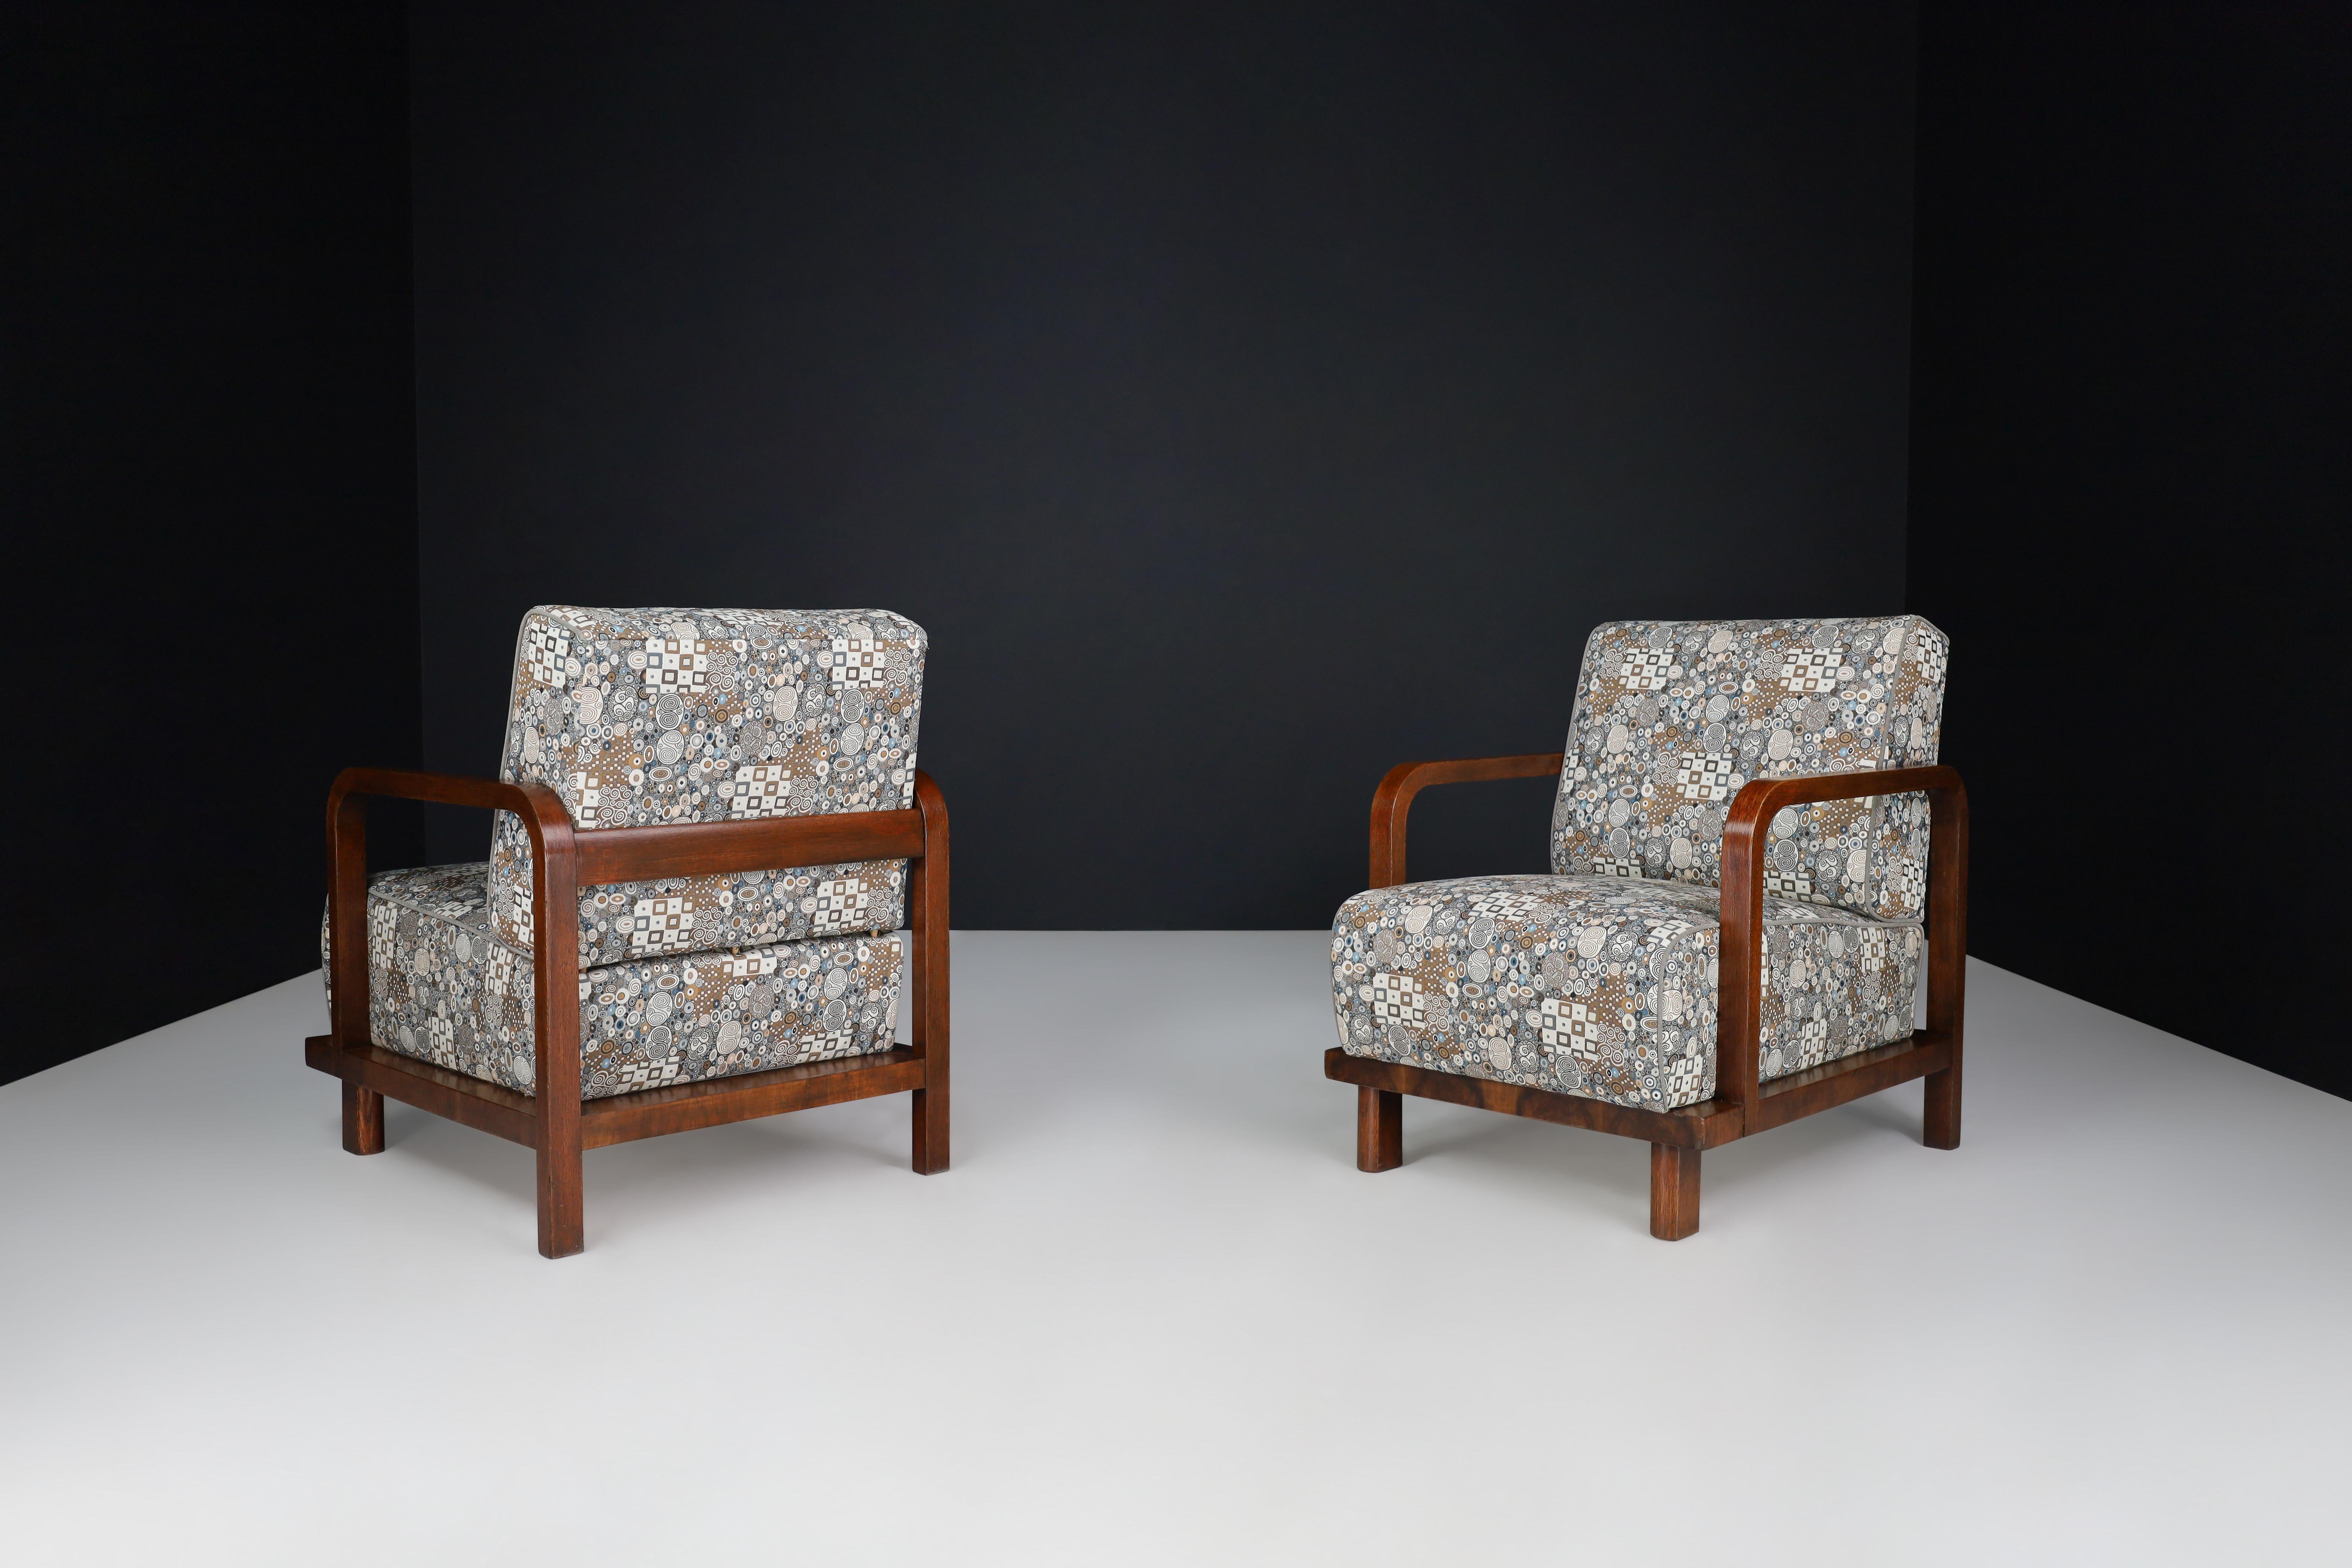 Pair of Two Art Deco Lounge Chairs Re-upholstered  Art Deco Fabric, France 1930s For Sale 2